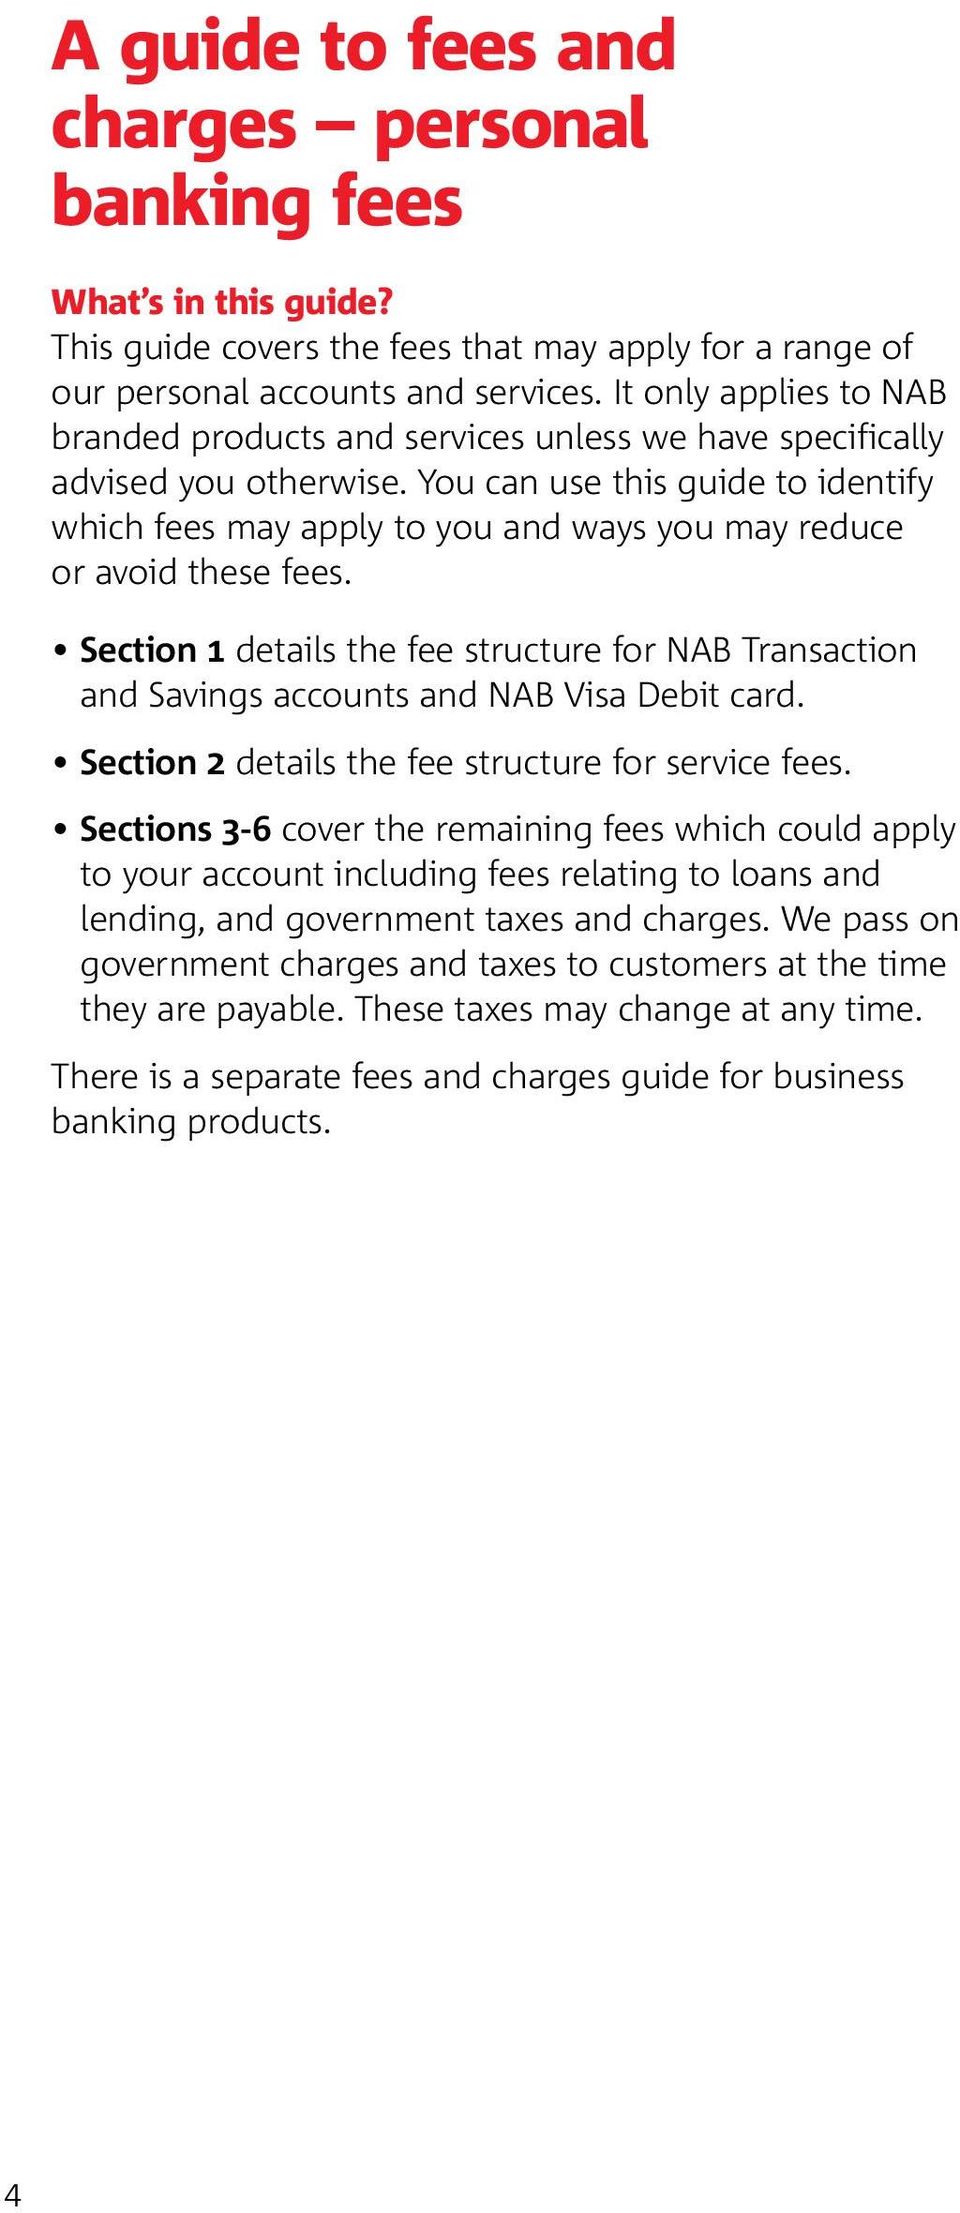 You can use this guide to identify which fees may apply to you and ways you may reduce or avoid these fees.